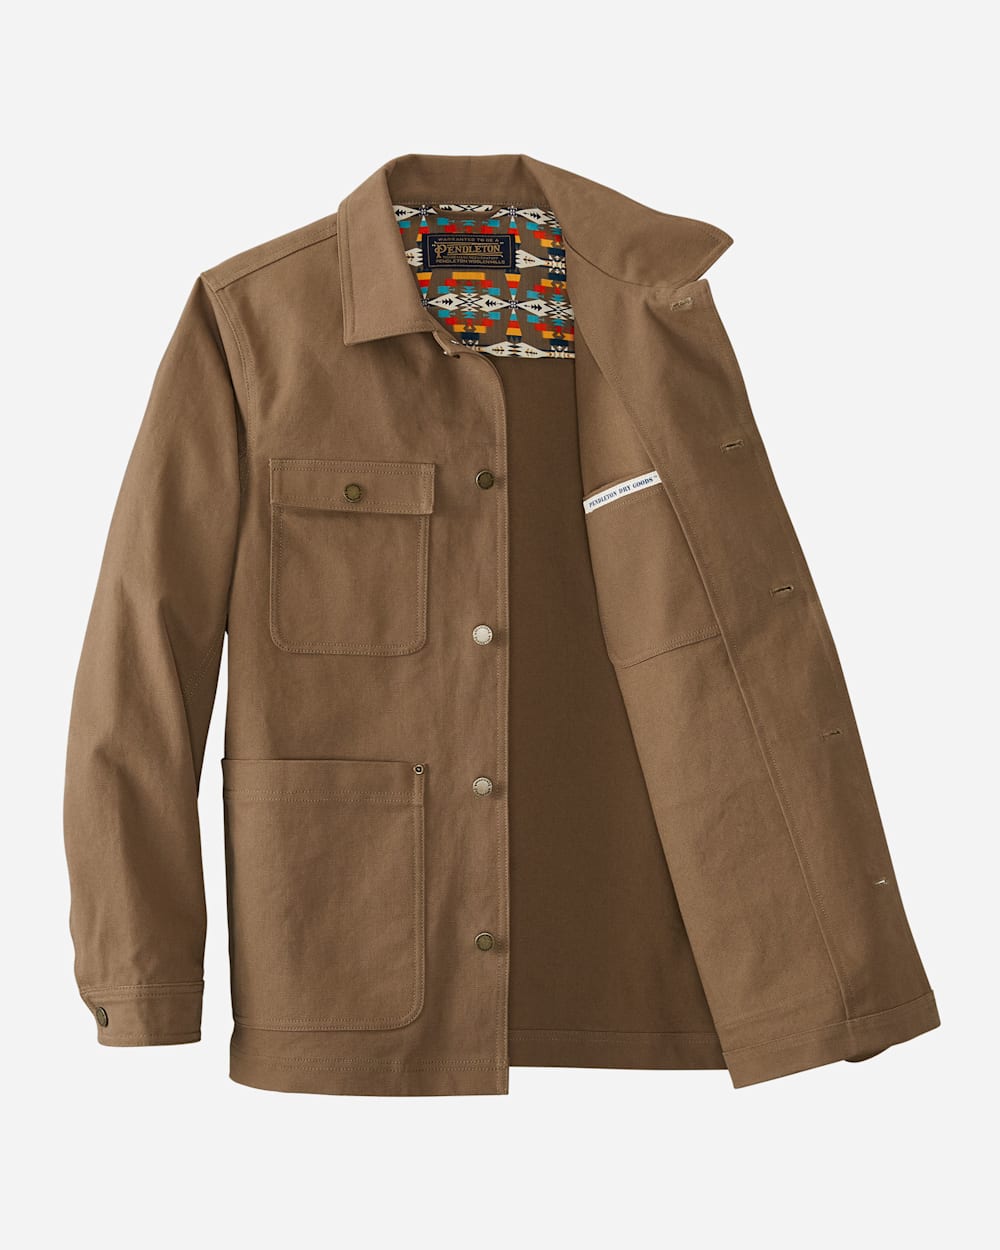 ALTERNATE VIEW OF MEN'S MILLS CANVAS CHORE JACKET IN MINERAL BROWN image number 2